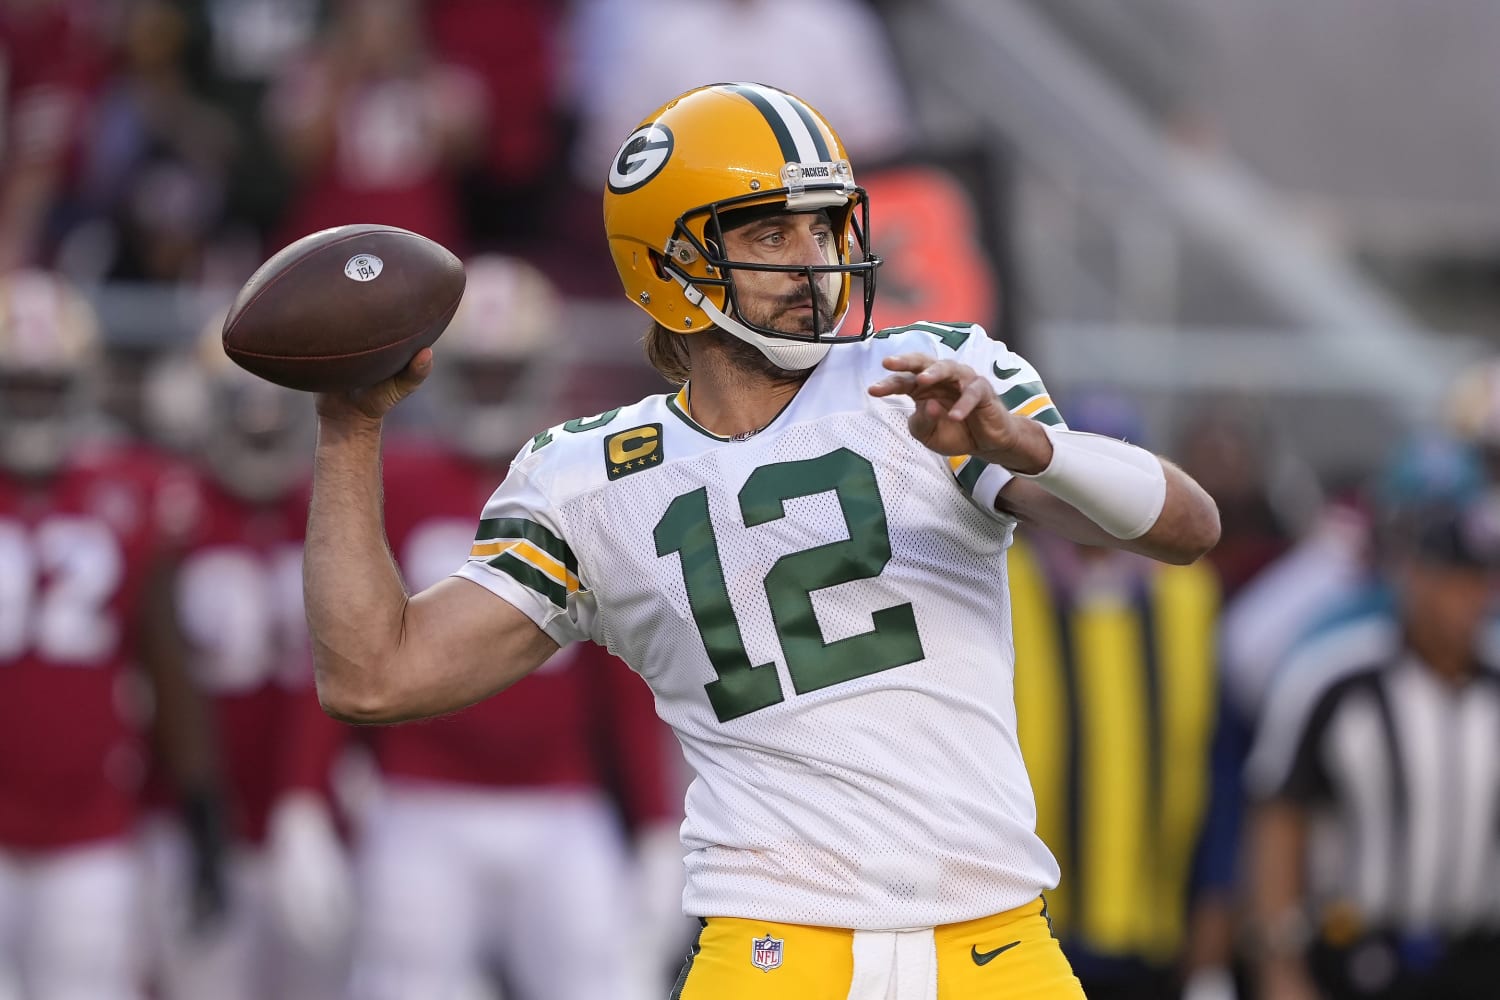 Aaron Rodgers reveals he’s unvaccinated, takes ivermectin and bashes ‘woke mob’